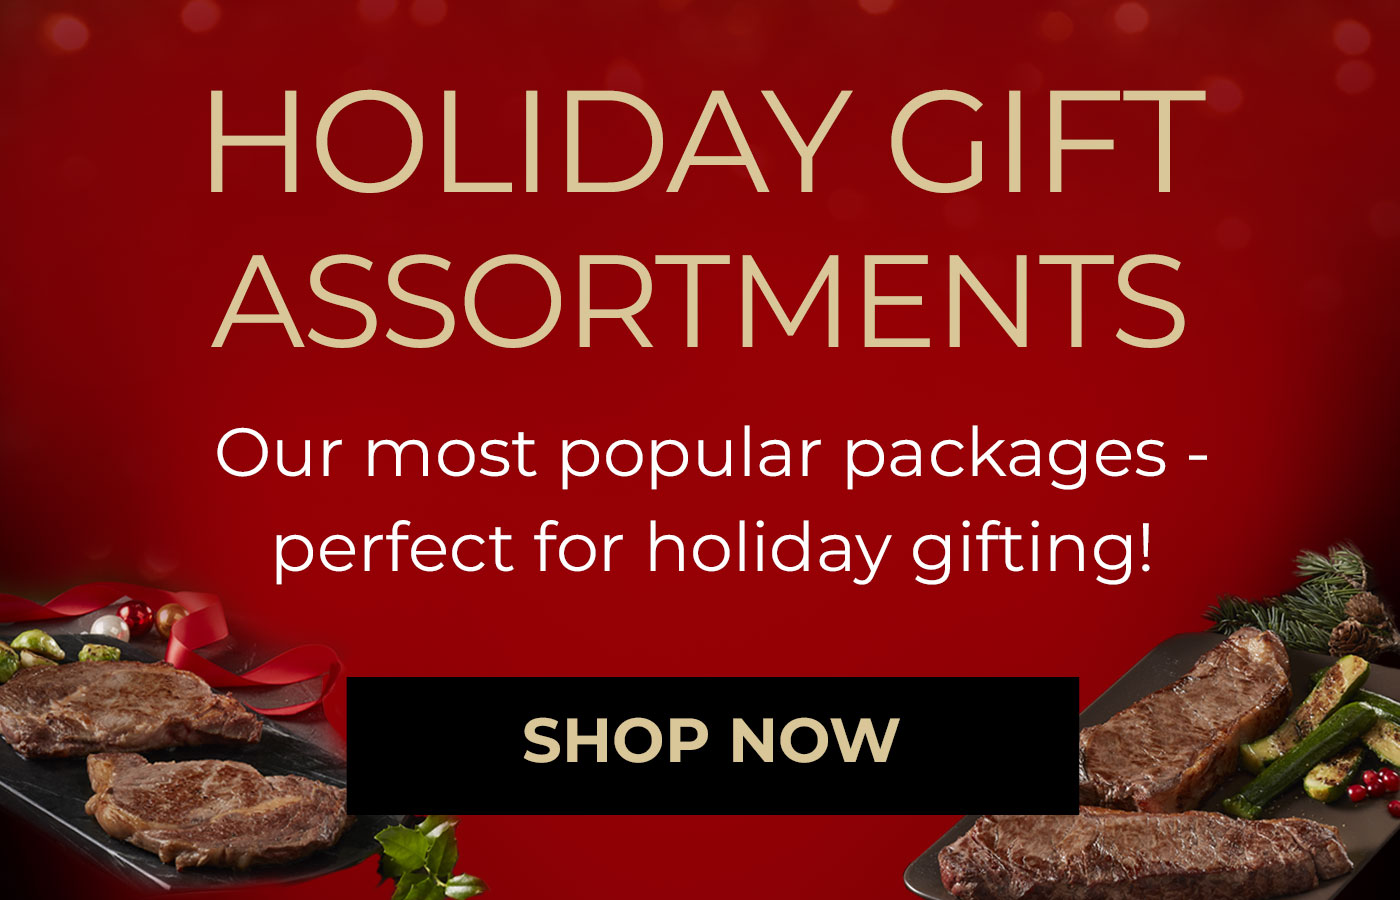 Holiday Gift Assortments. Our most popular packages – perfect for holiday gifting! Shop Now